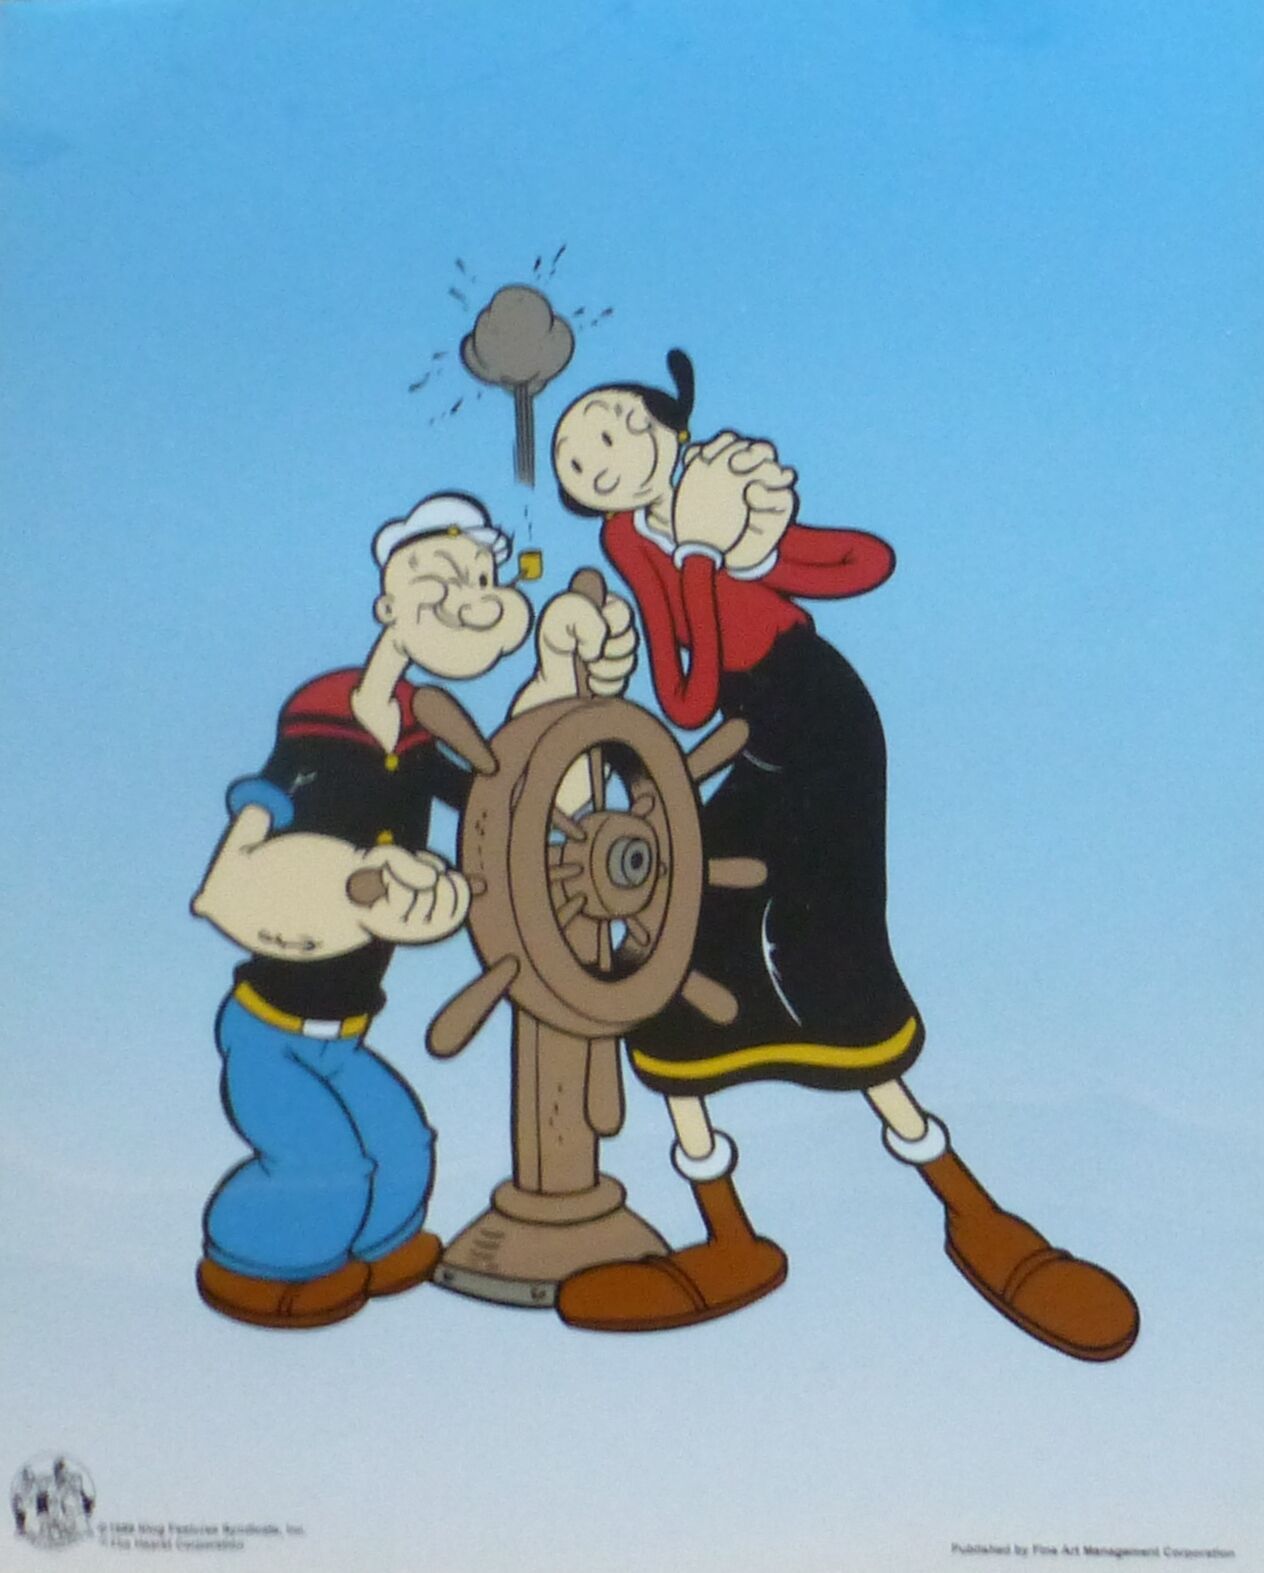 POPEYE THE SAILOR MAN & OLIVE OIL \